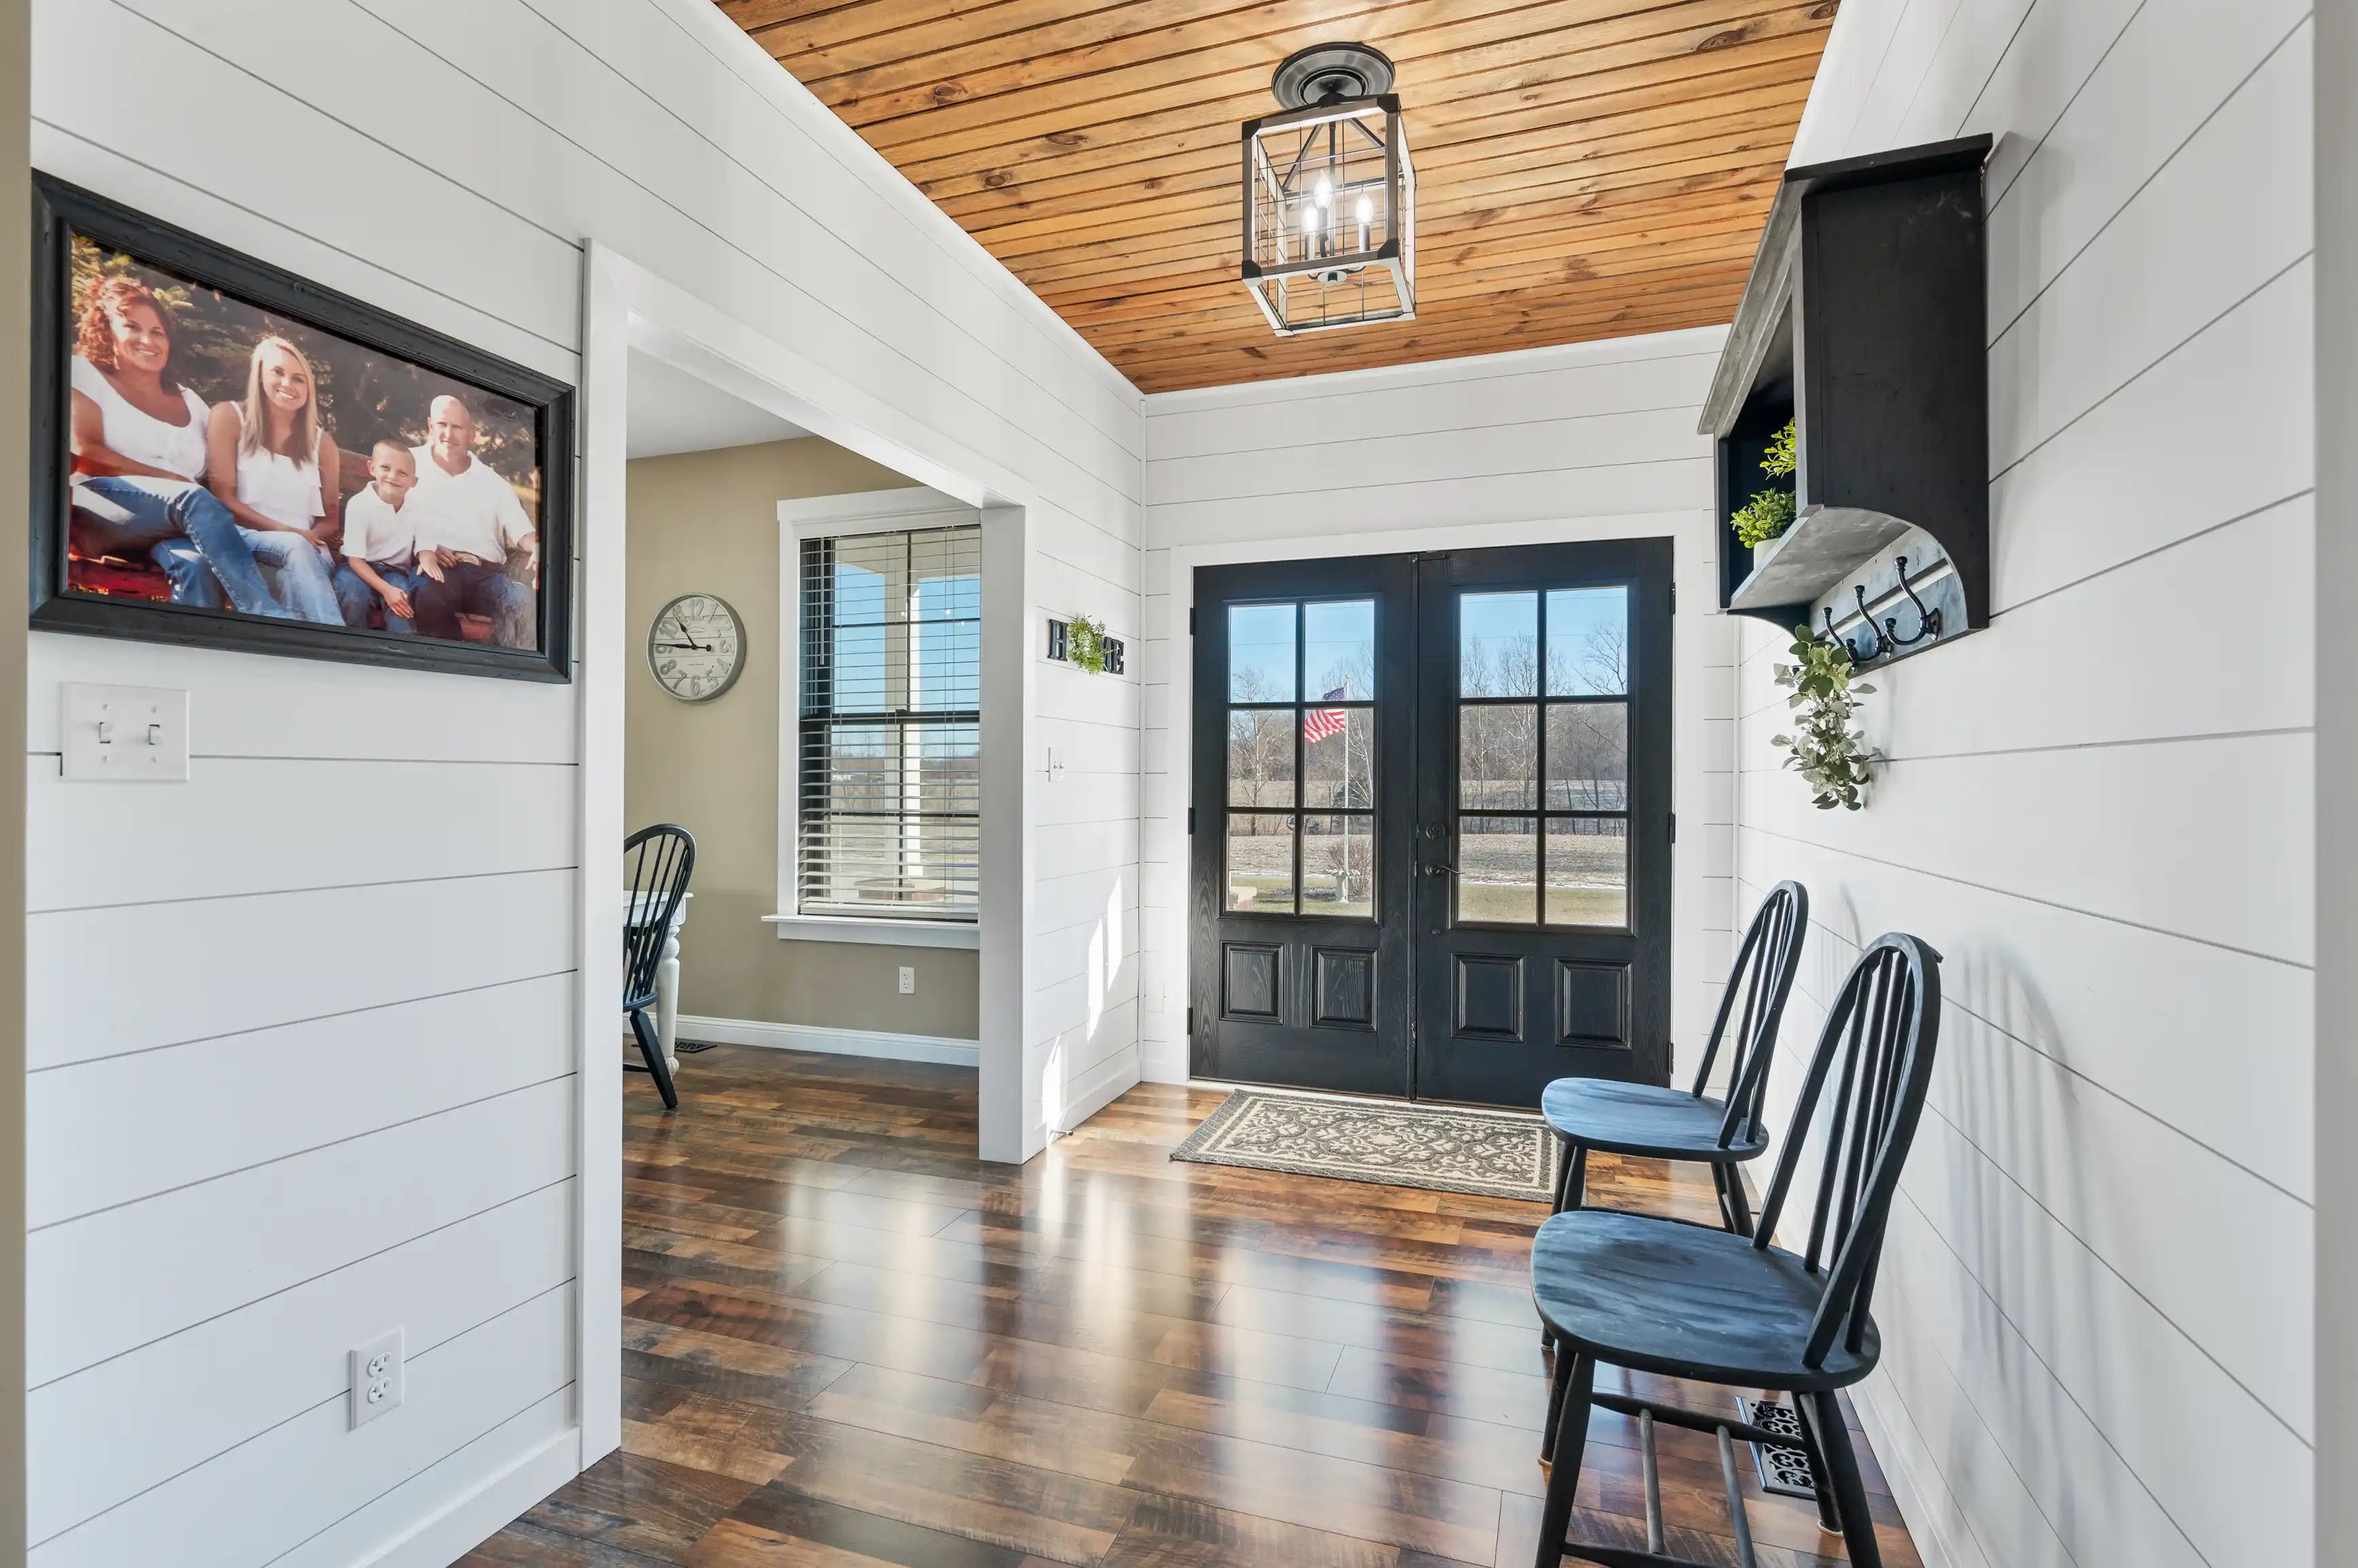 Bright interior entryway with wooden flooring, a white shiplap wall, a wooden ceiling, black double doors, and decorative elements including wall-mounted coat hooks and a framed family photograph.